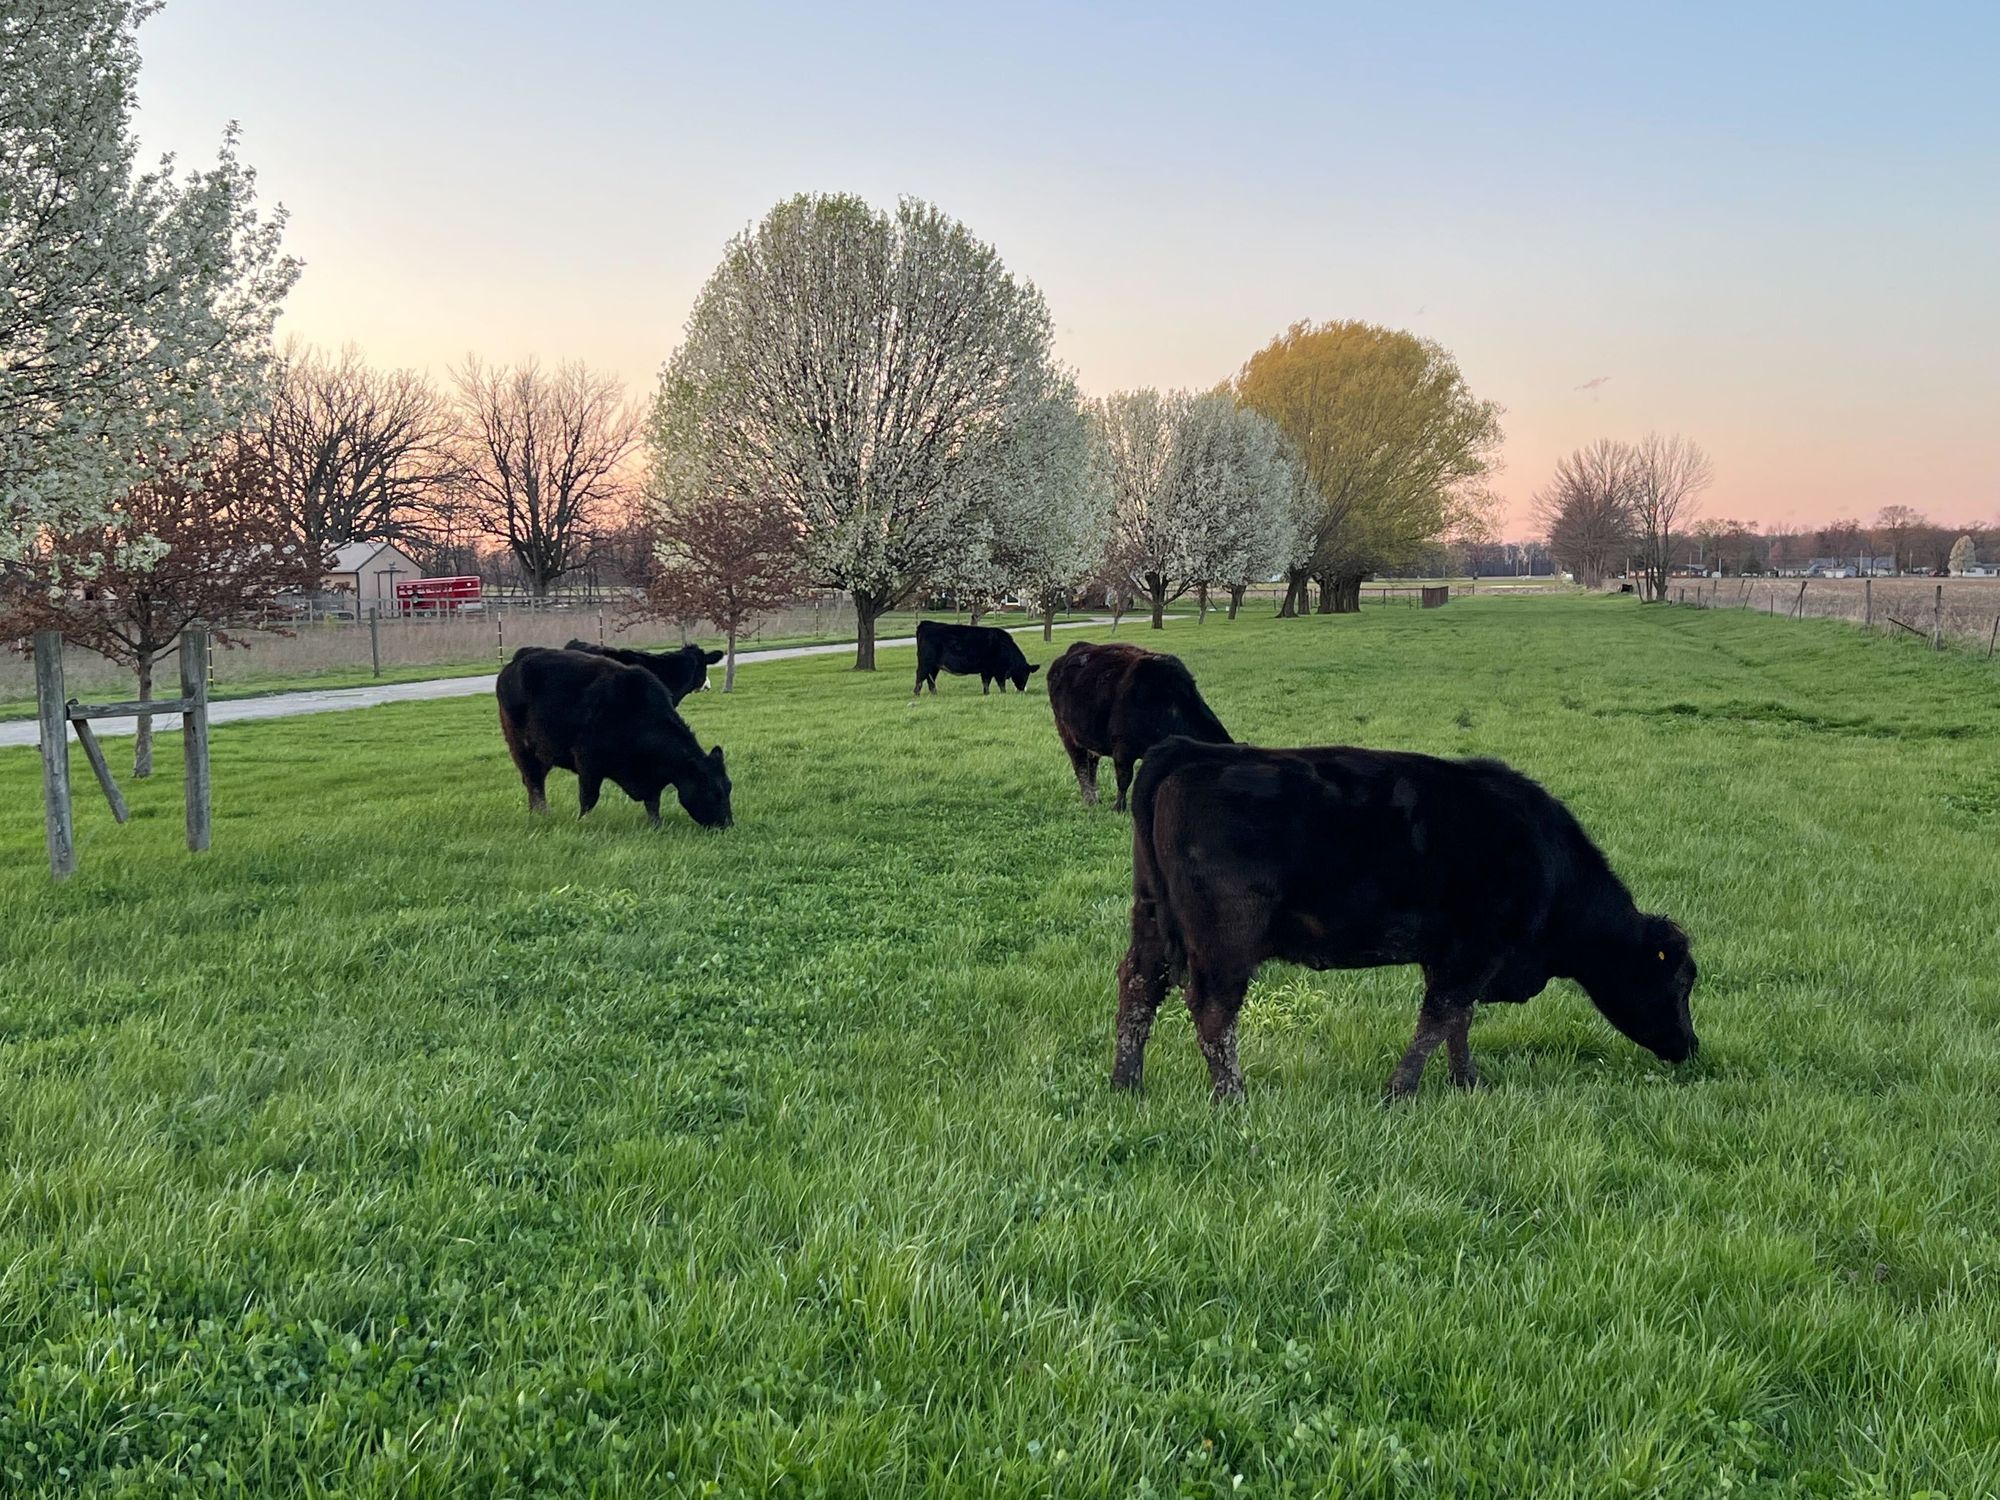 Cows in a field in front of budding trees at dusk